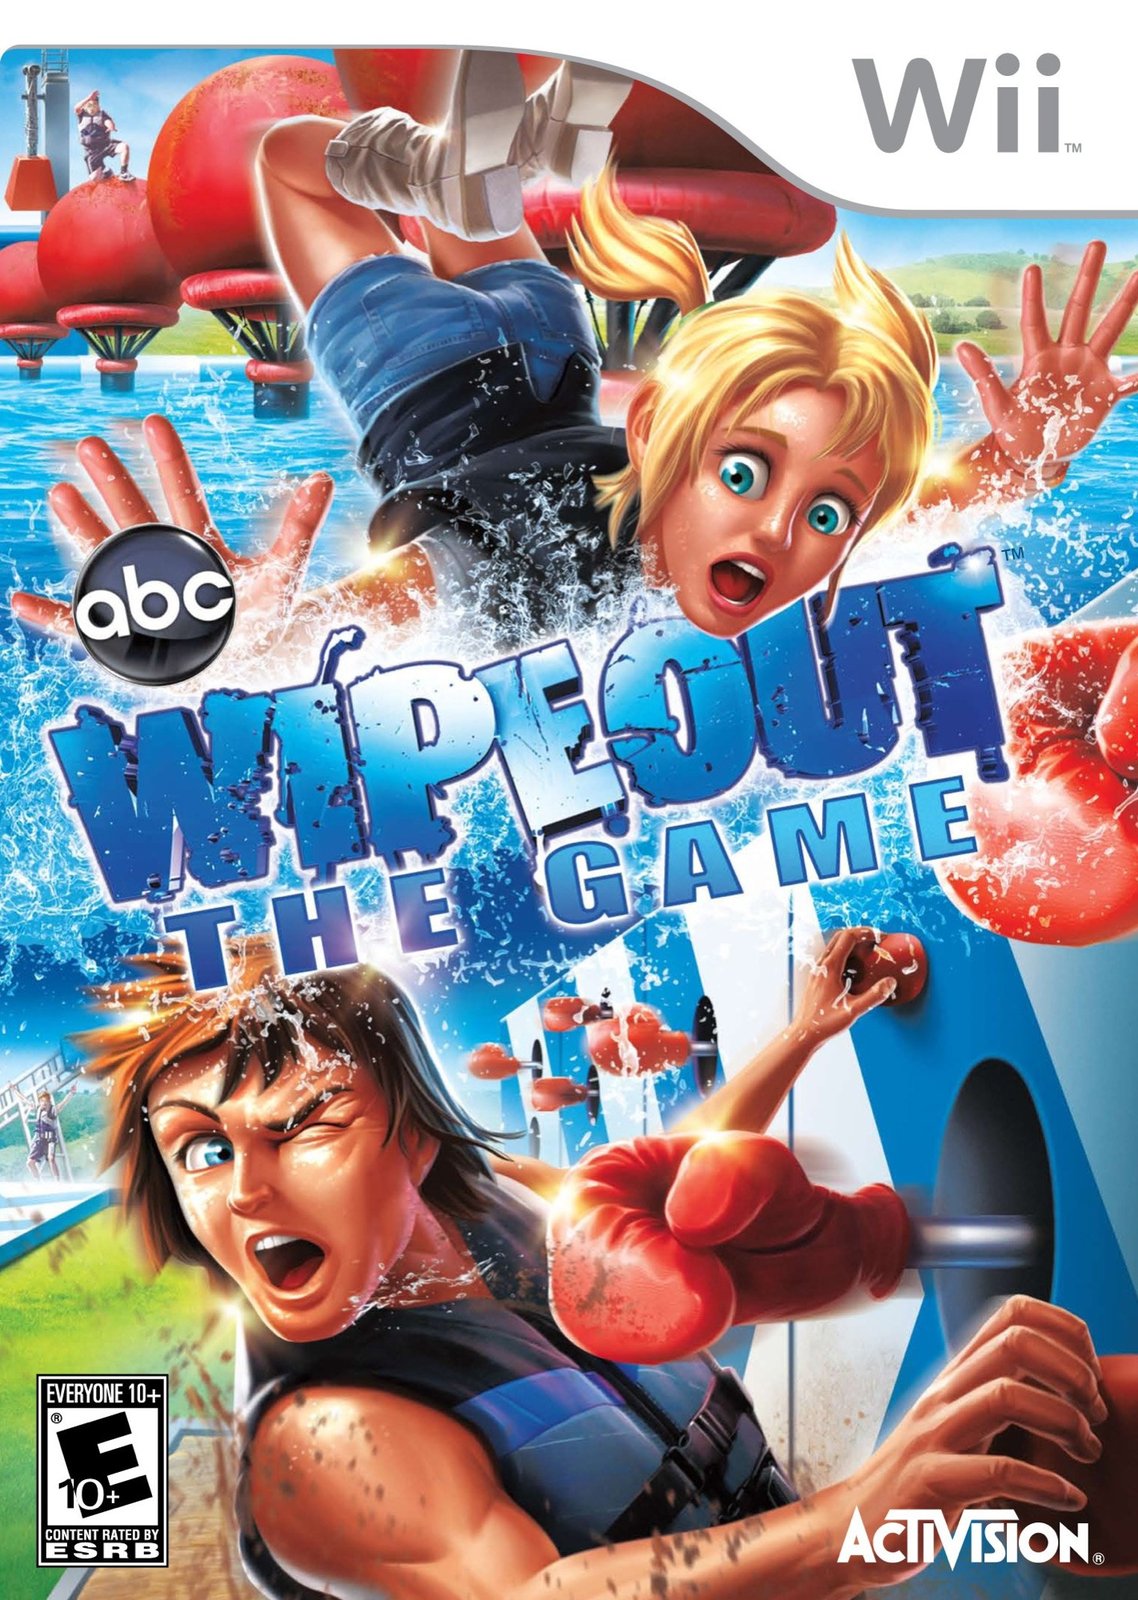 wii game hack pack 4.3 e